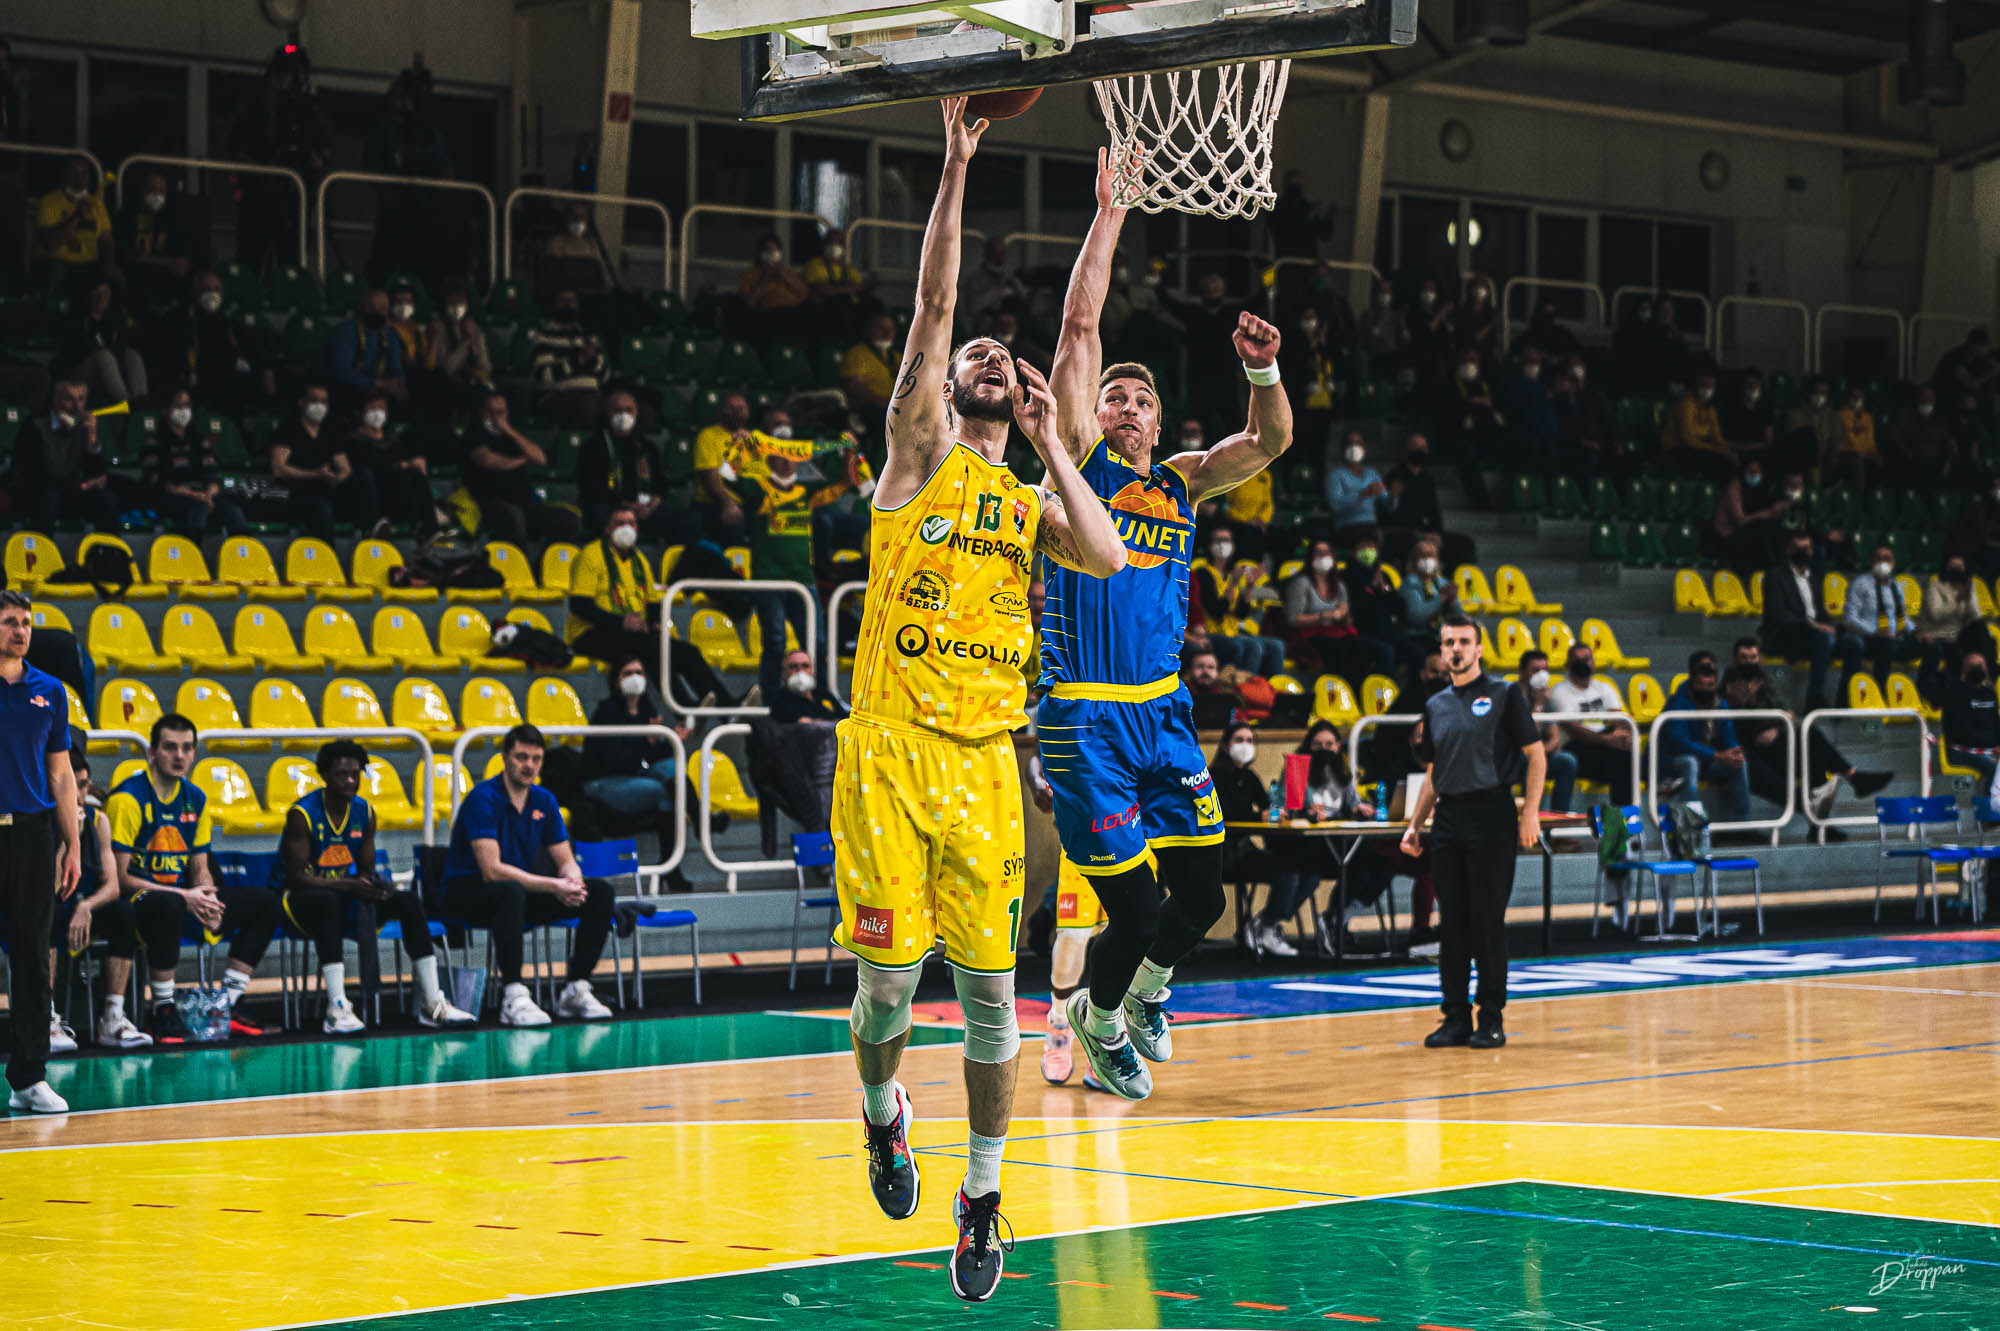 Levice goes to Ústí nad Labem with 7-point lead